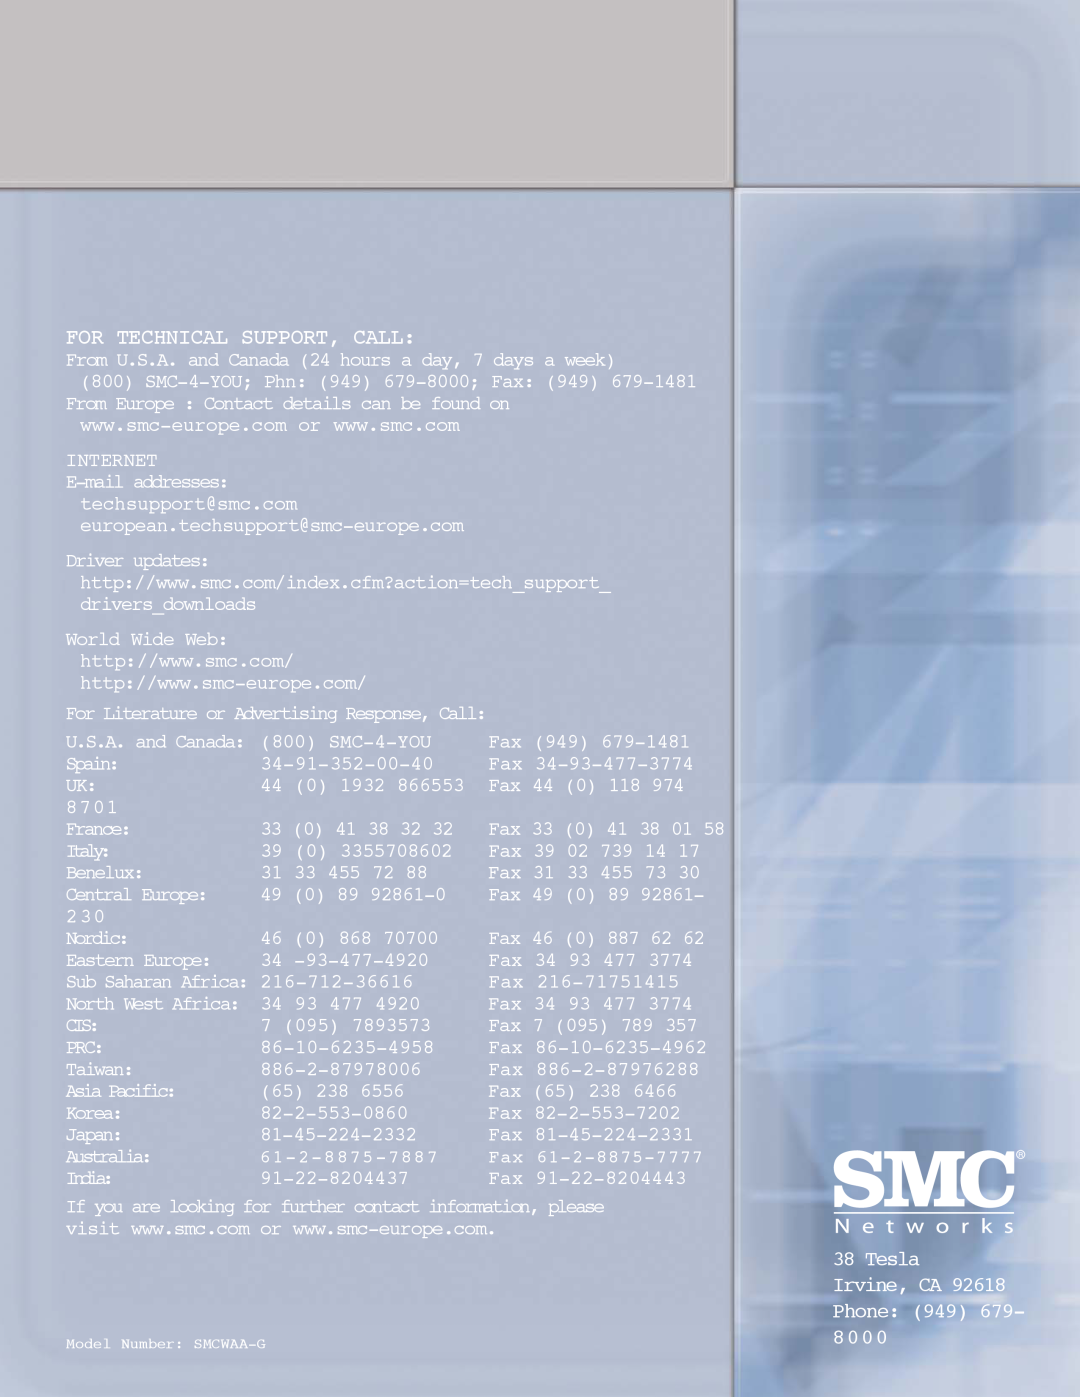 SMC Networks 802.11g manual For Technical Support, Call, Tesla Irvine, CA 92618 Phone 949 679 